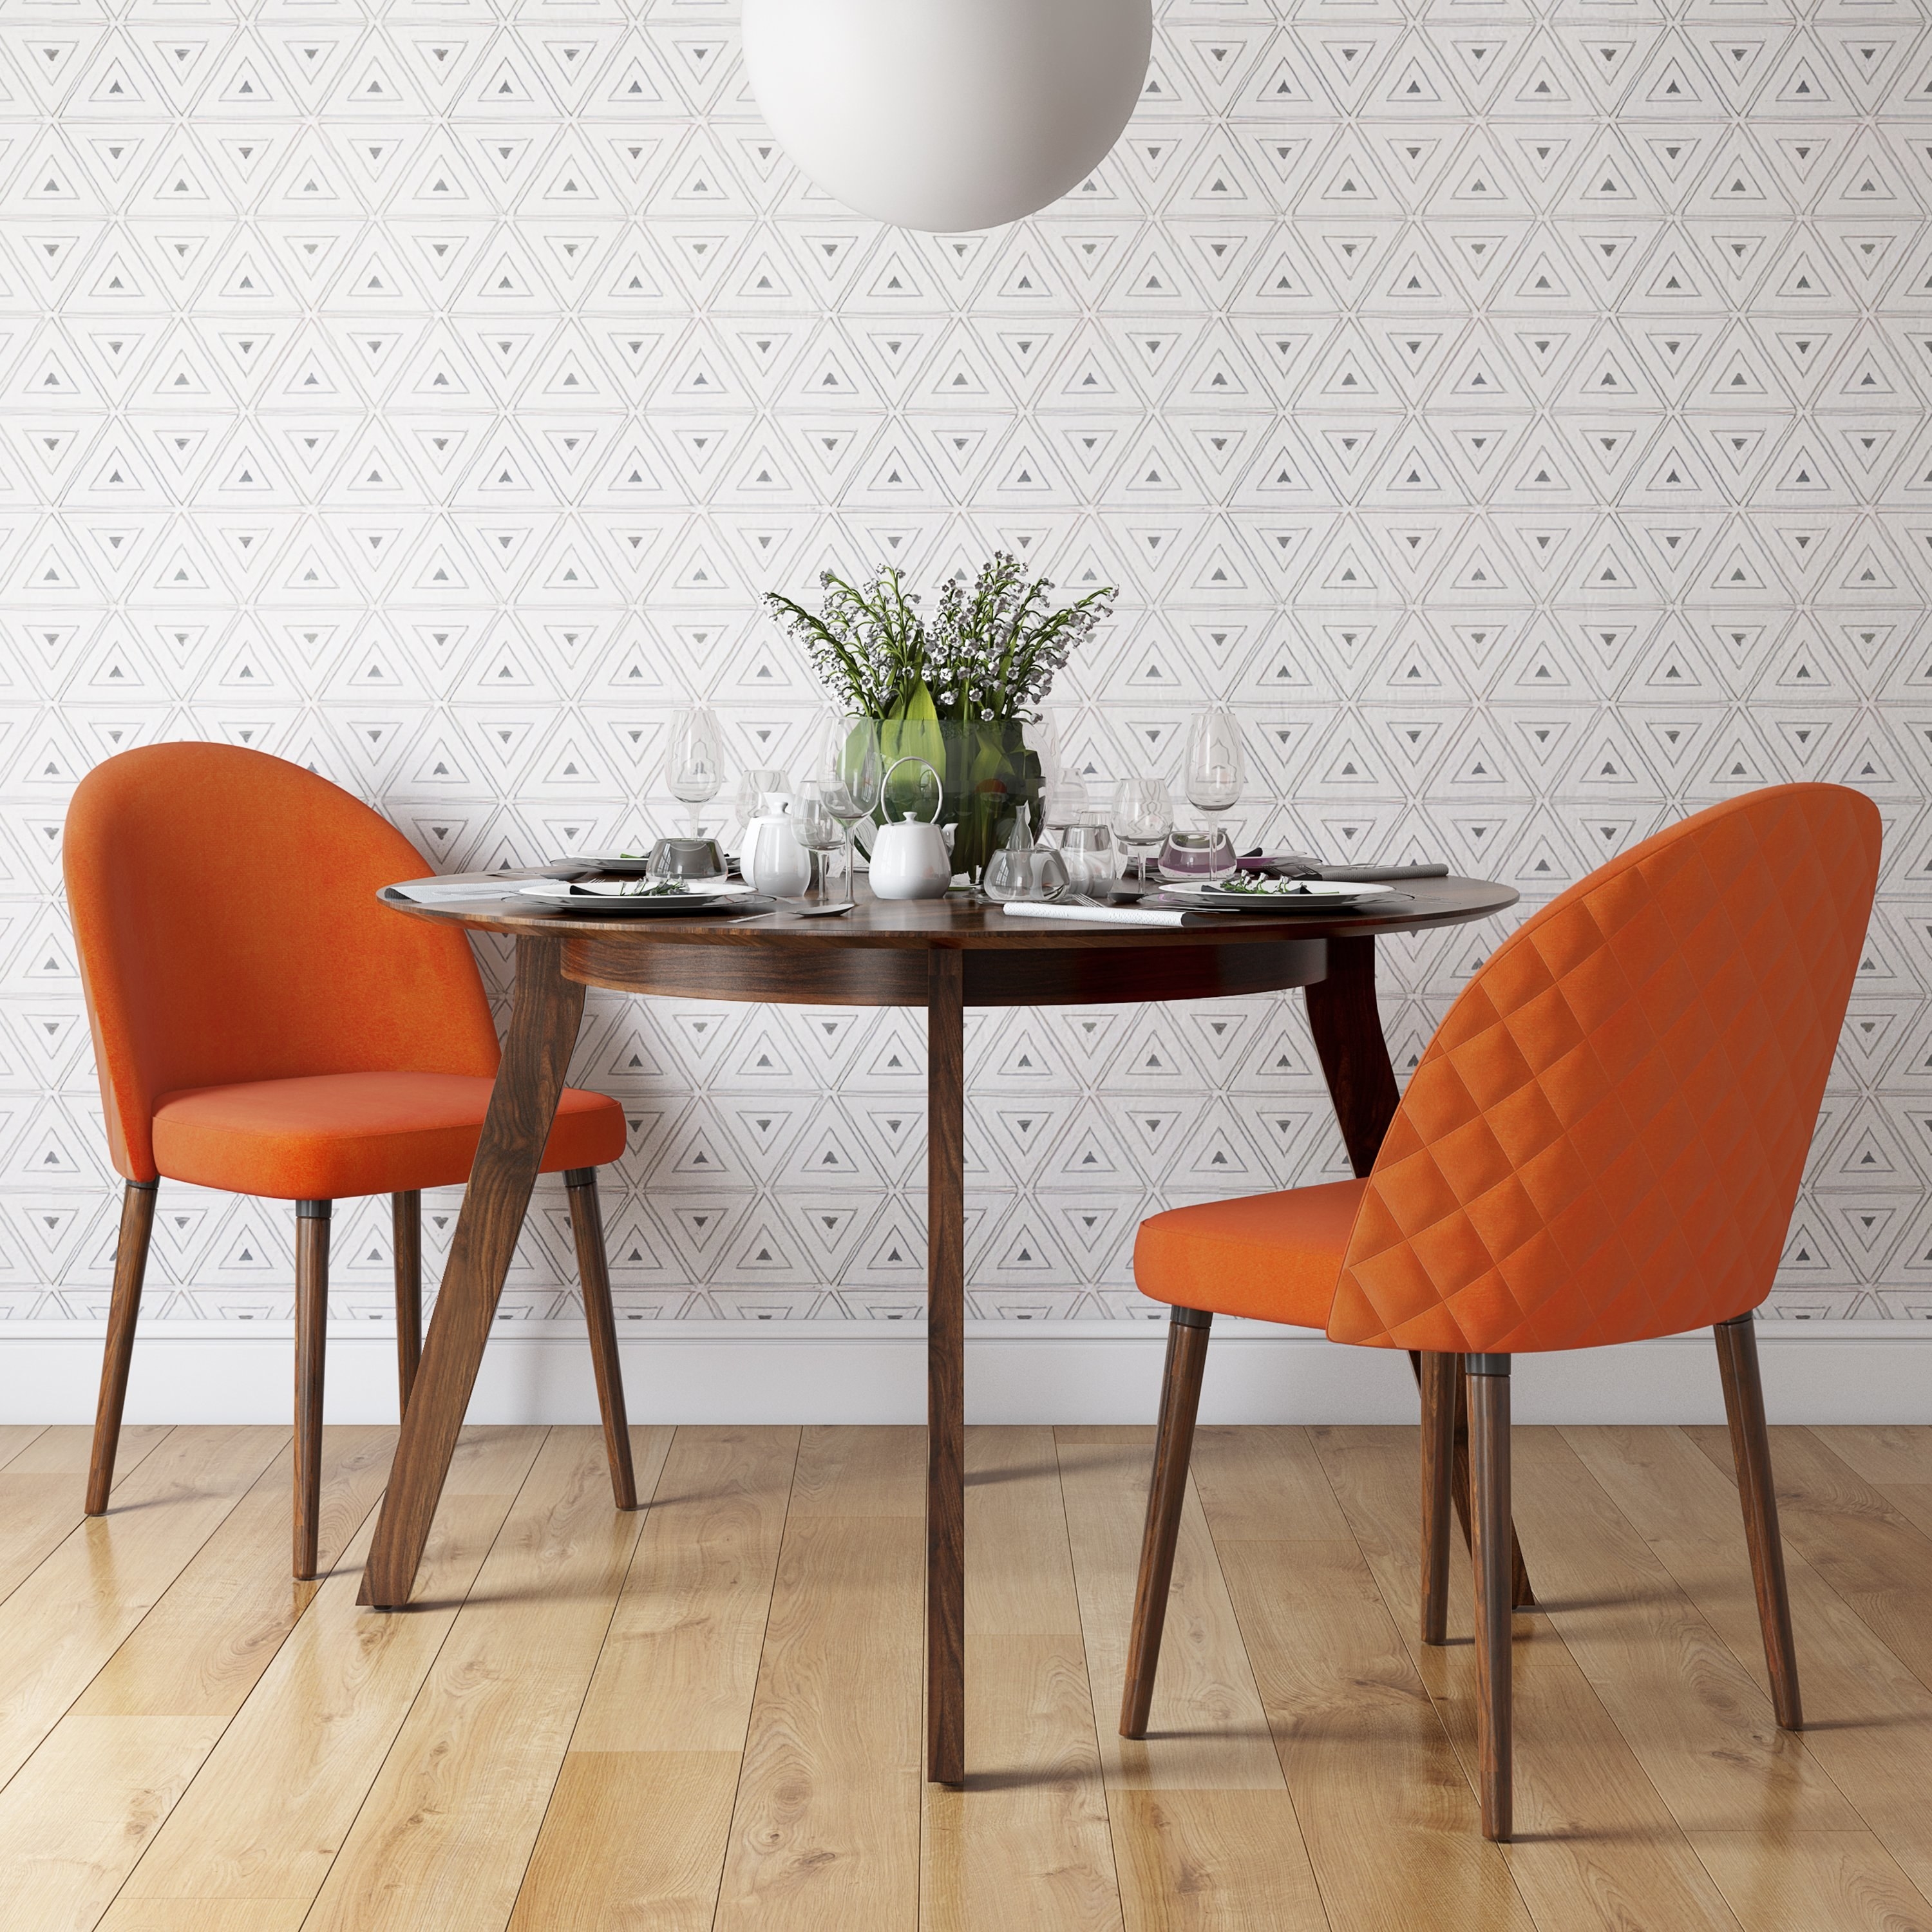 The dining chairs in the color Orange Velvet